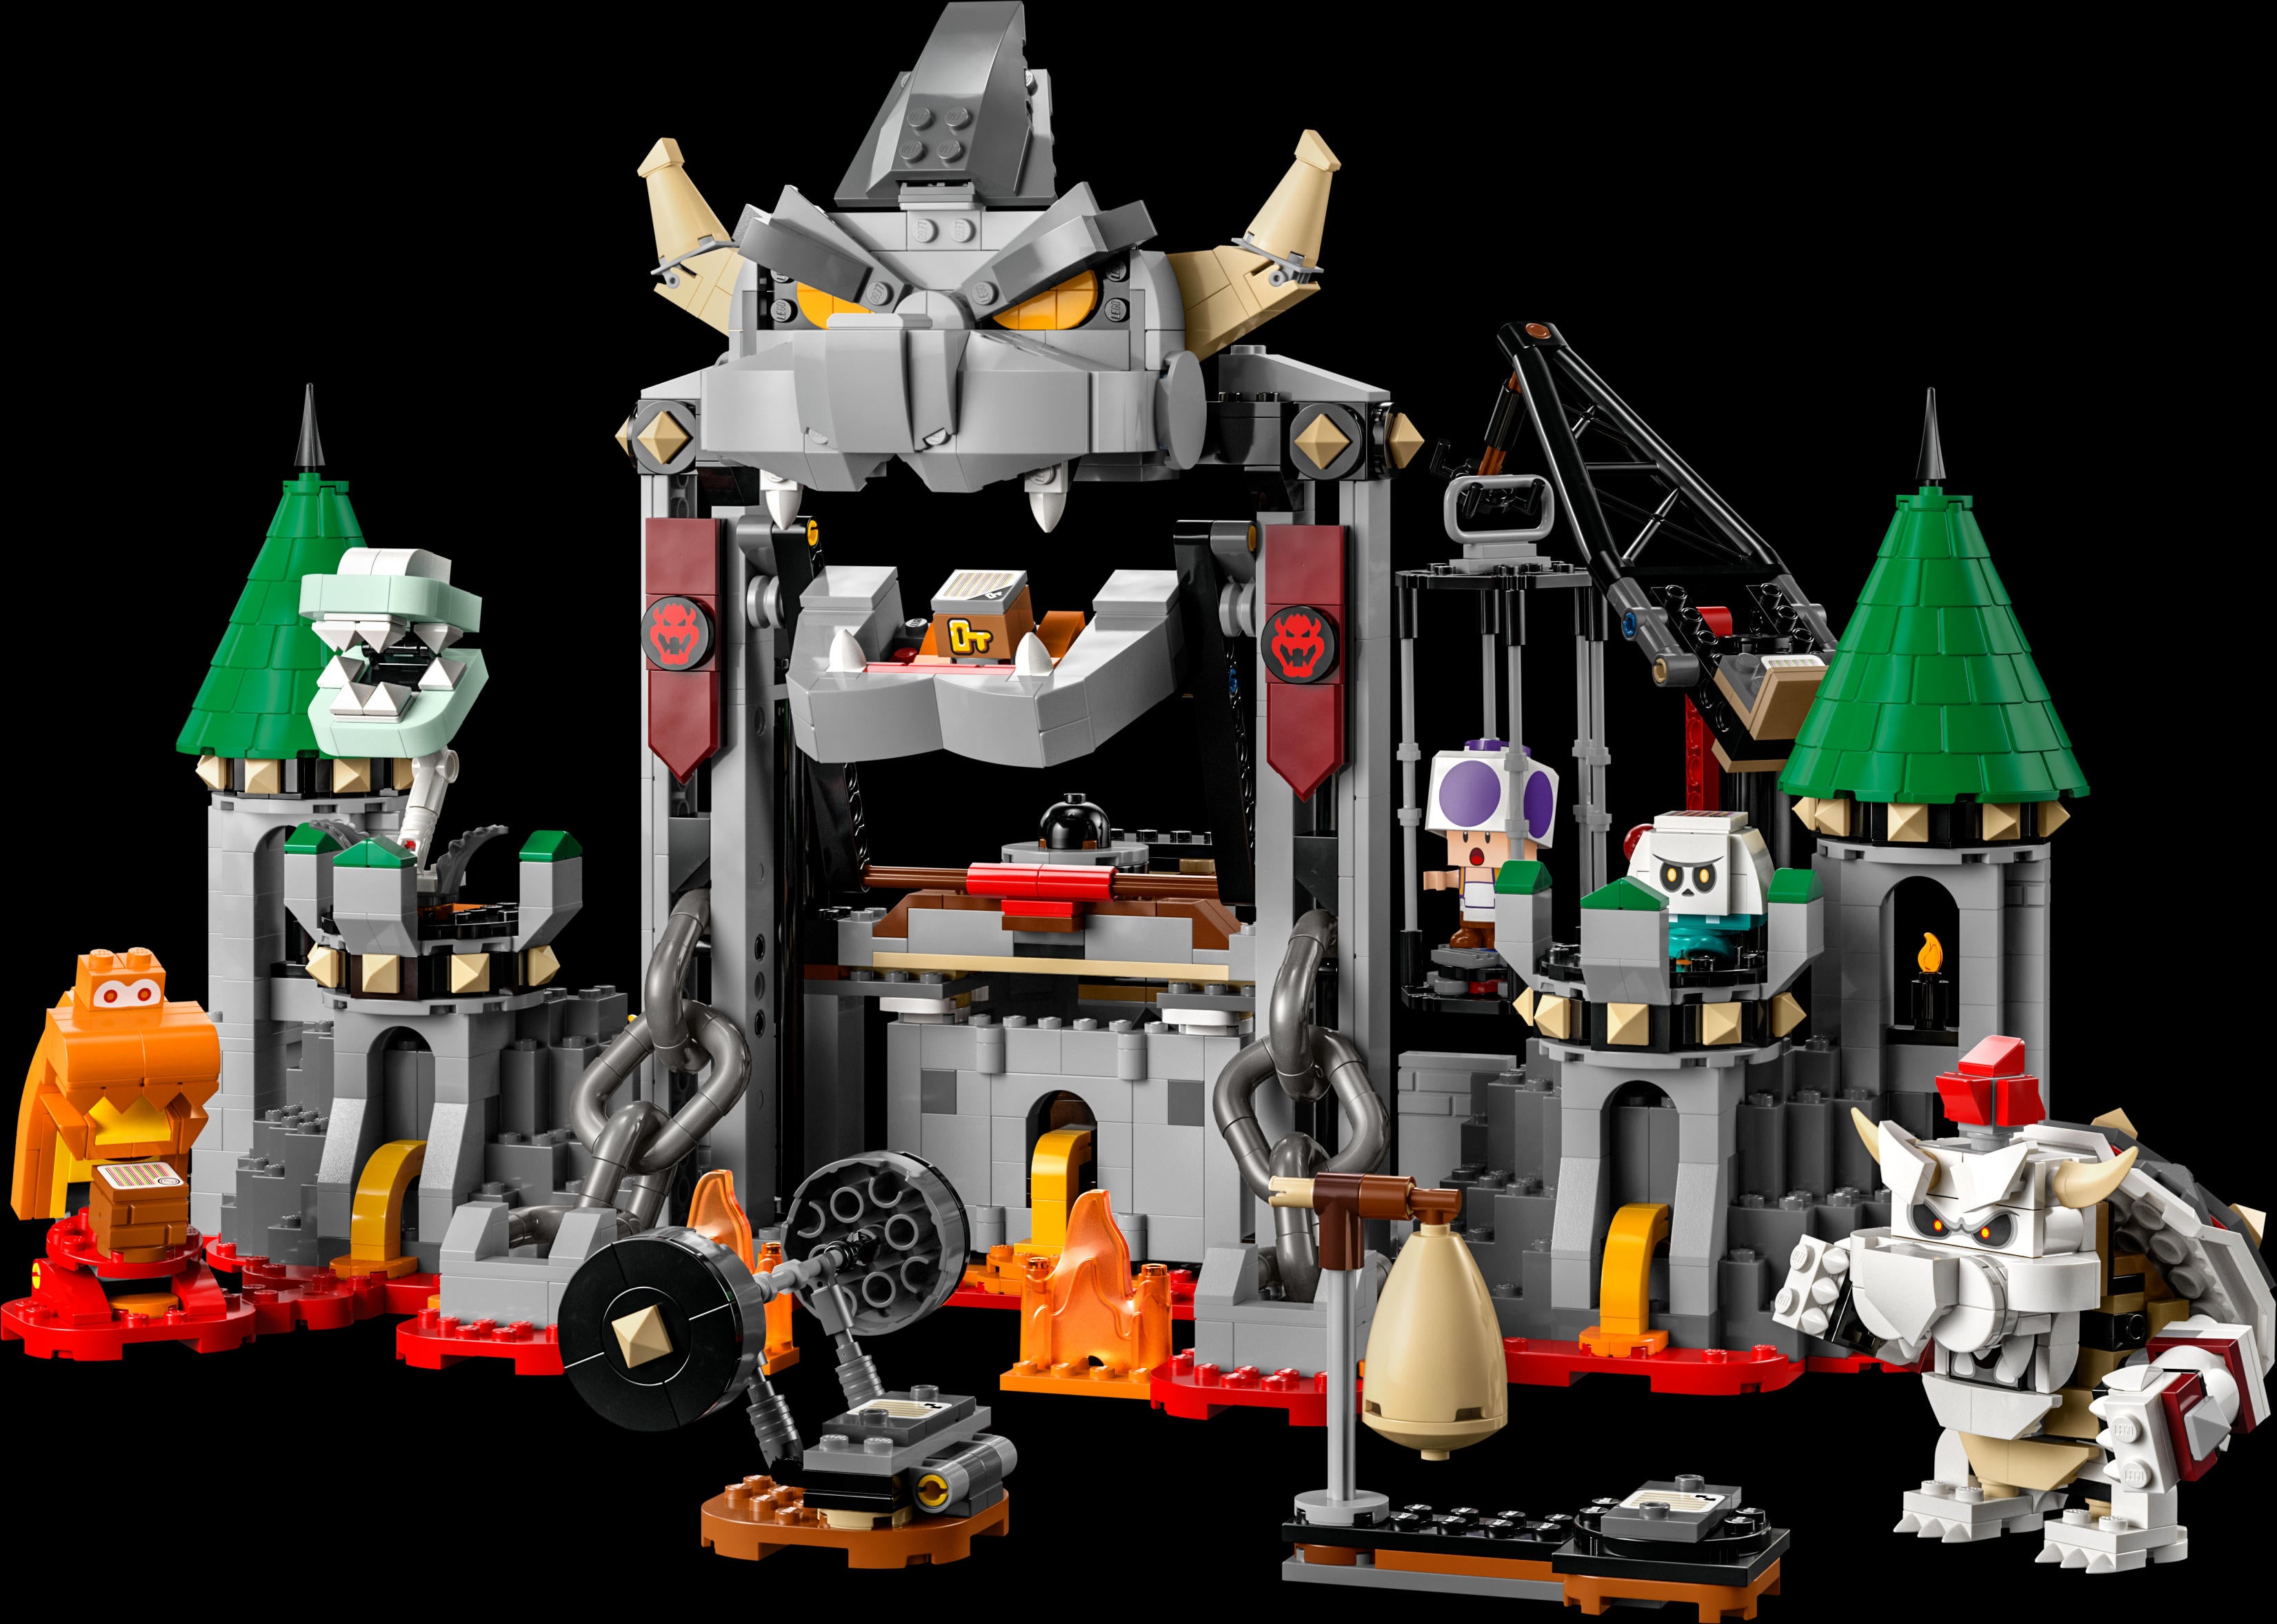 LEGO Announces Dry Bowser Castle and Donkey Kong Sets For MAR10 Day 2023